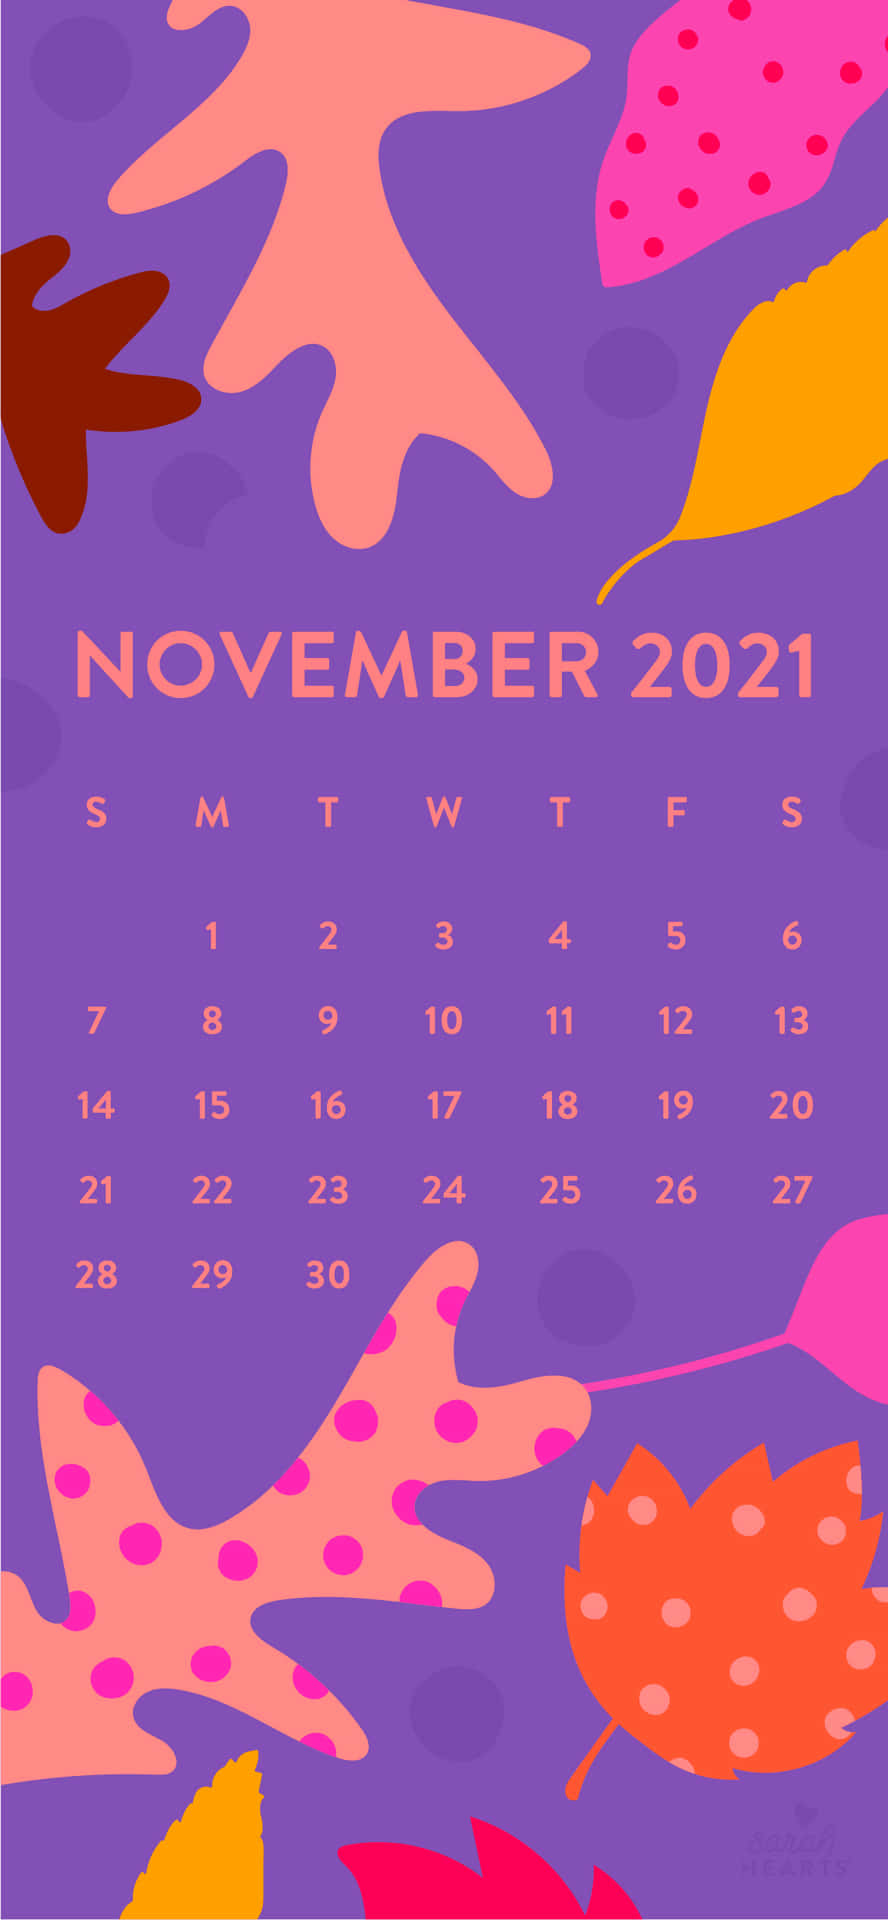 Stay Up to Date with this November 2021 Calendar Wallpaper Wallpaper